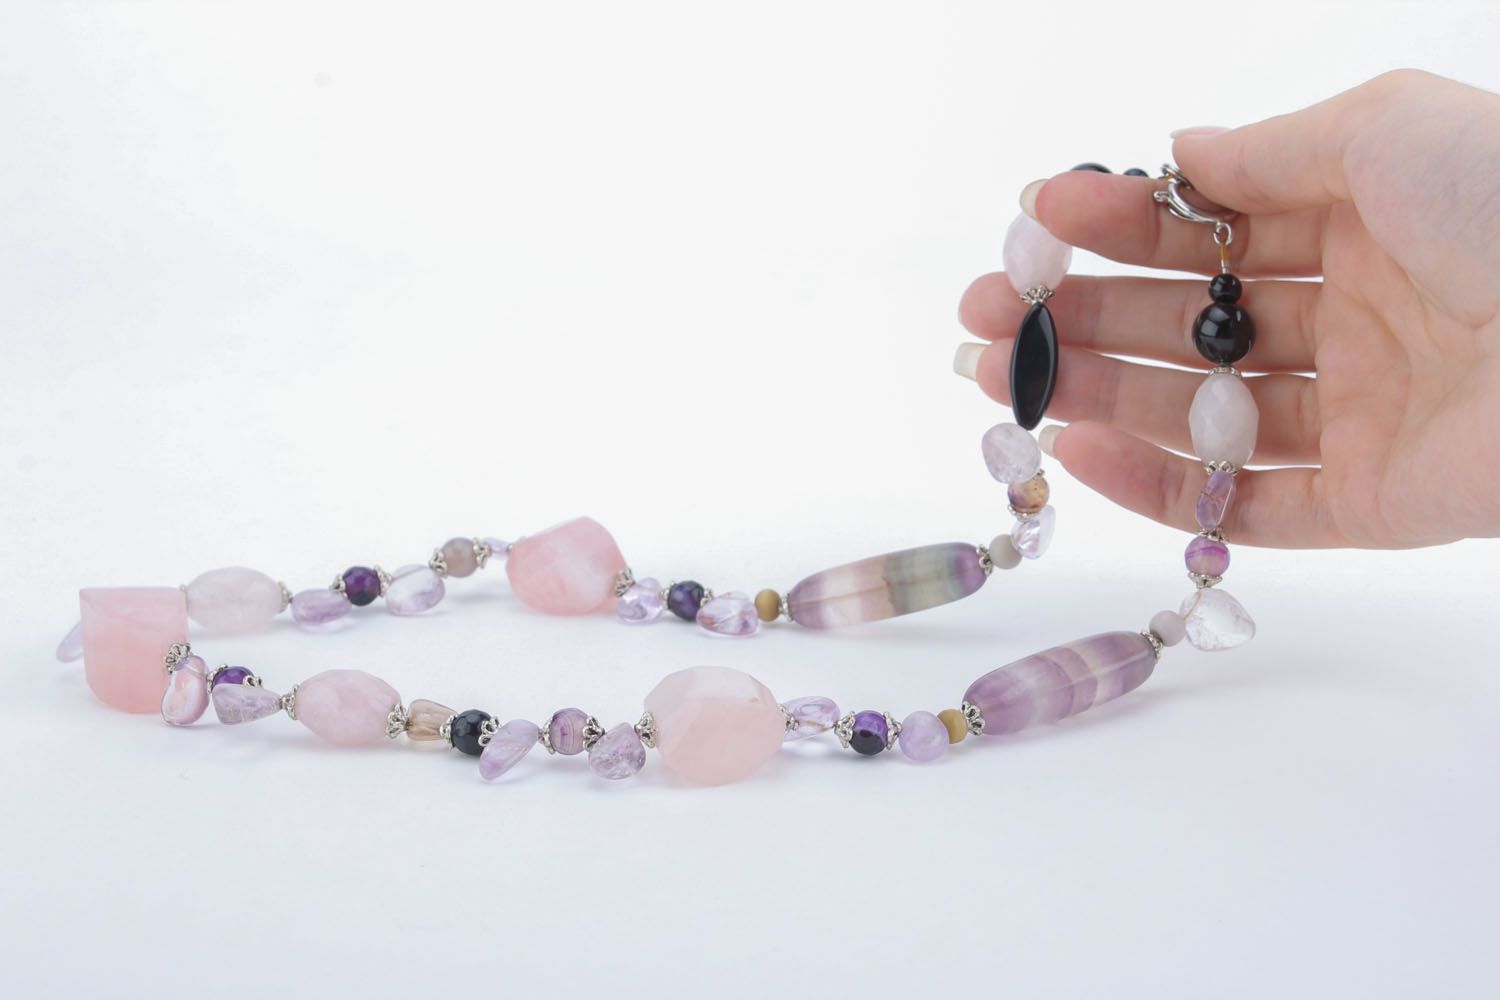 Necklace made of natural stones photo 5